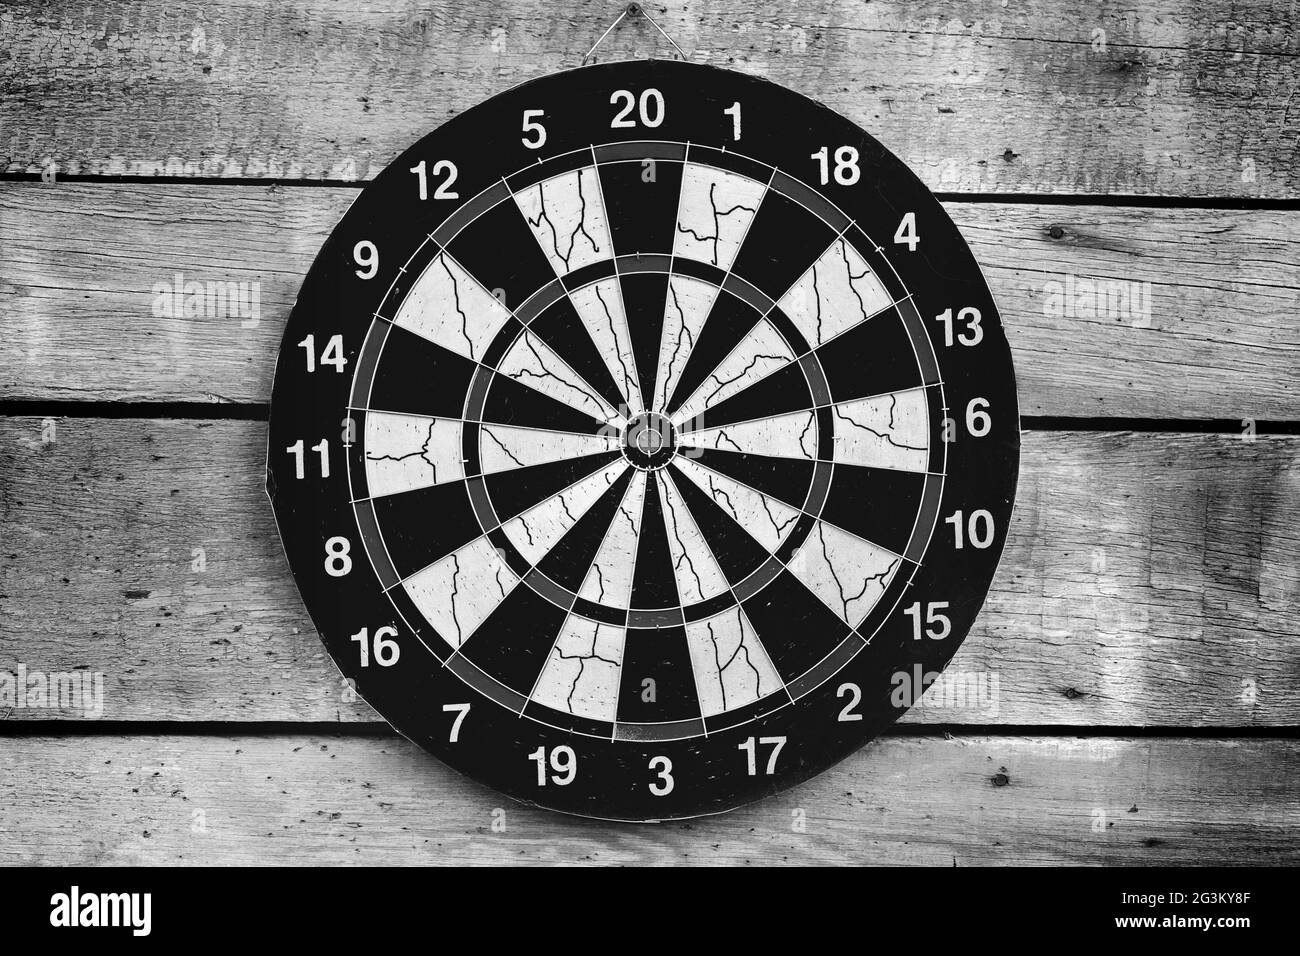 Dartboard mounted on a wooden wall, front view. Black and white photo background Stock Photo